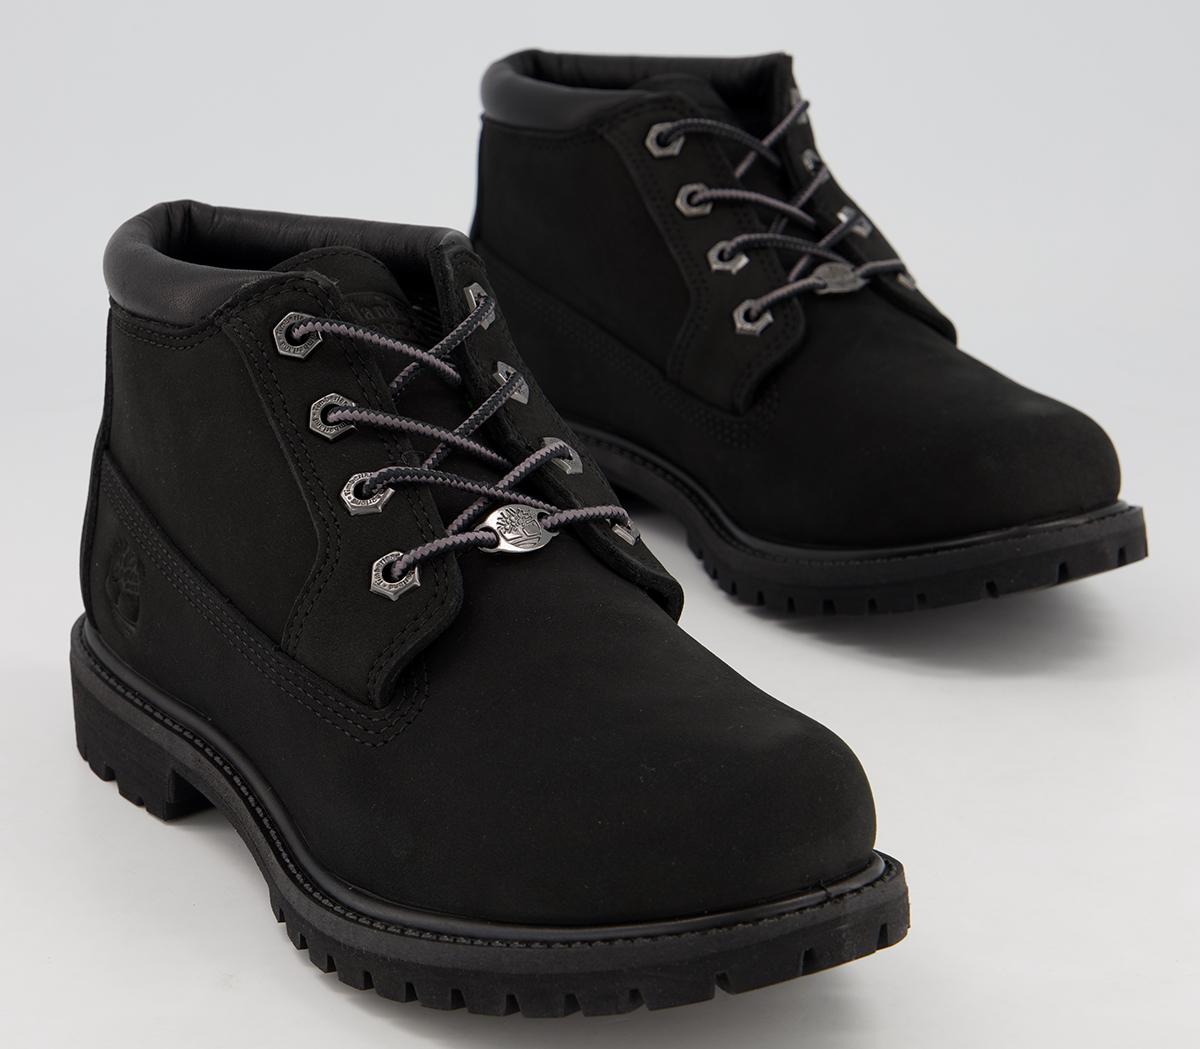 Timberland Nellie Chukka Double Waterproof Boots Black Mono - Ankle Boots